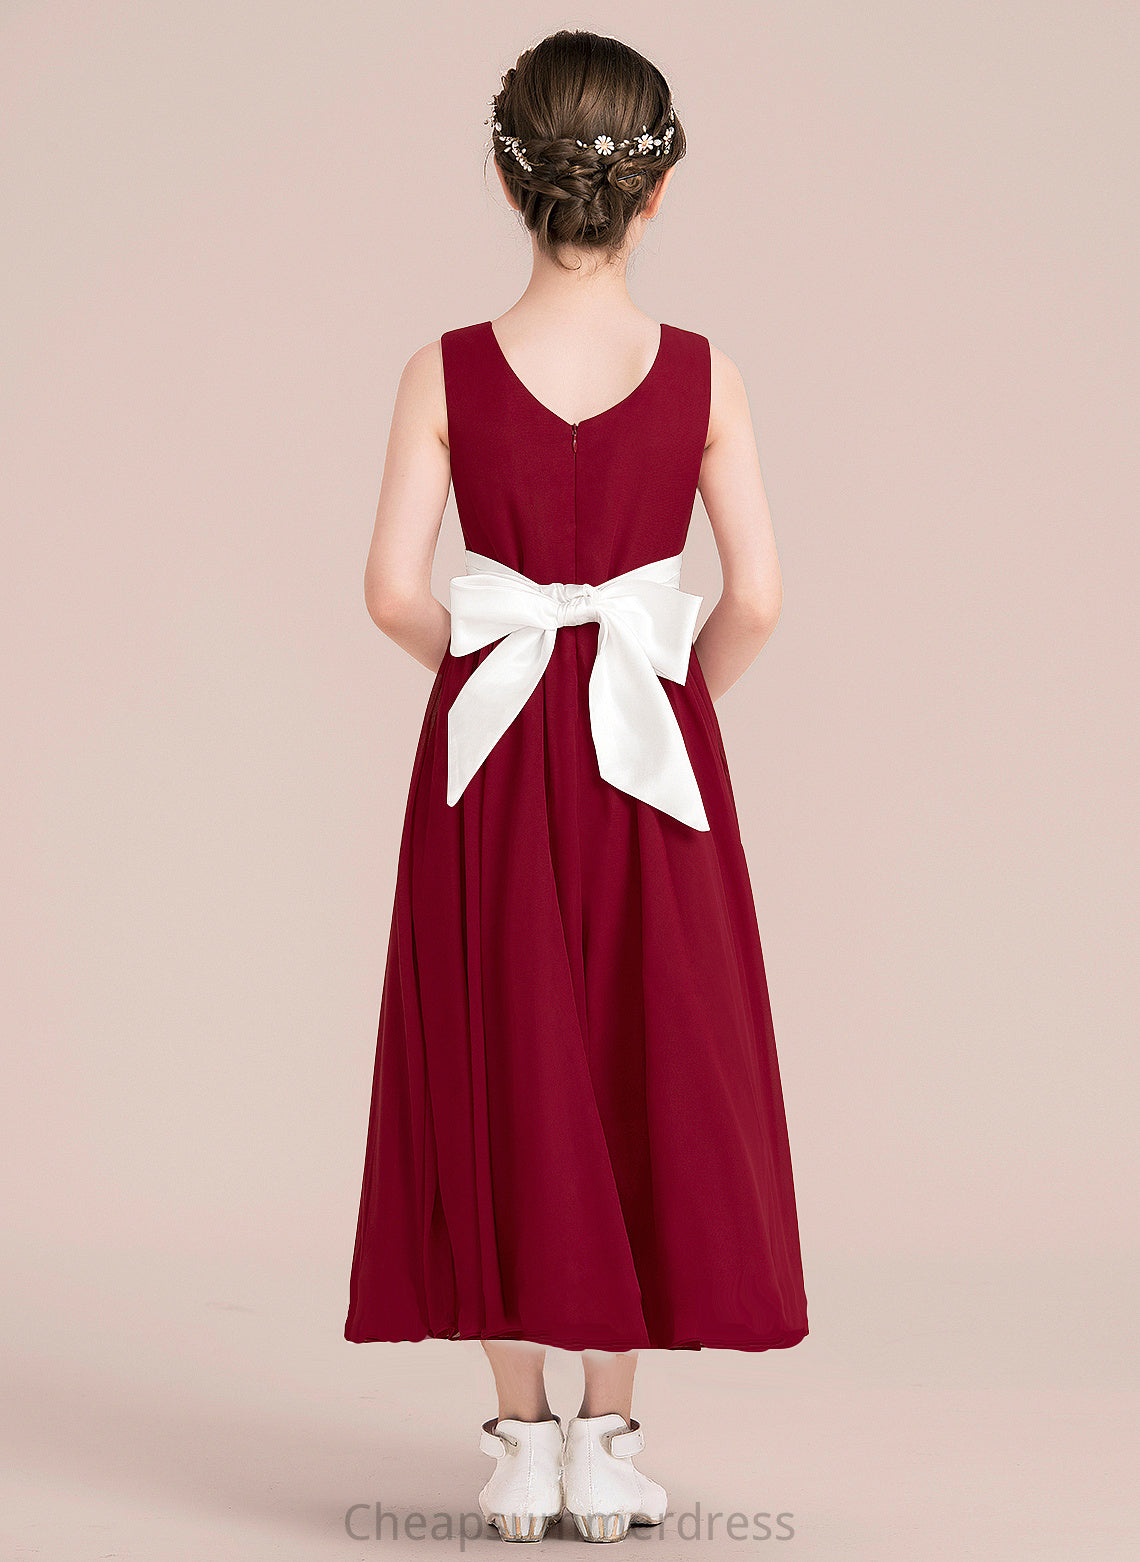 Empire Junior Bridesmaid Dresses Ankle-Length Scoop Neck A-Line Chiffon With Sash Shelby Bow(s)